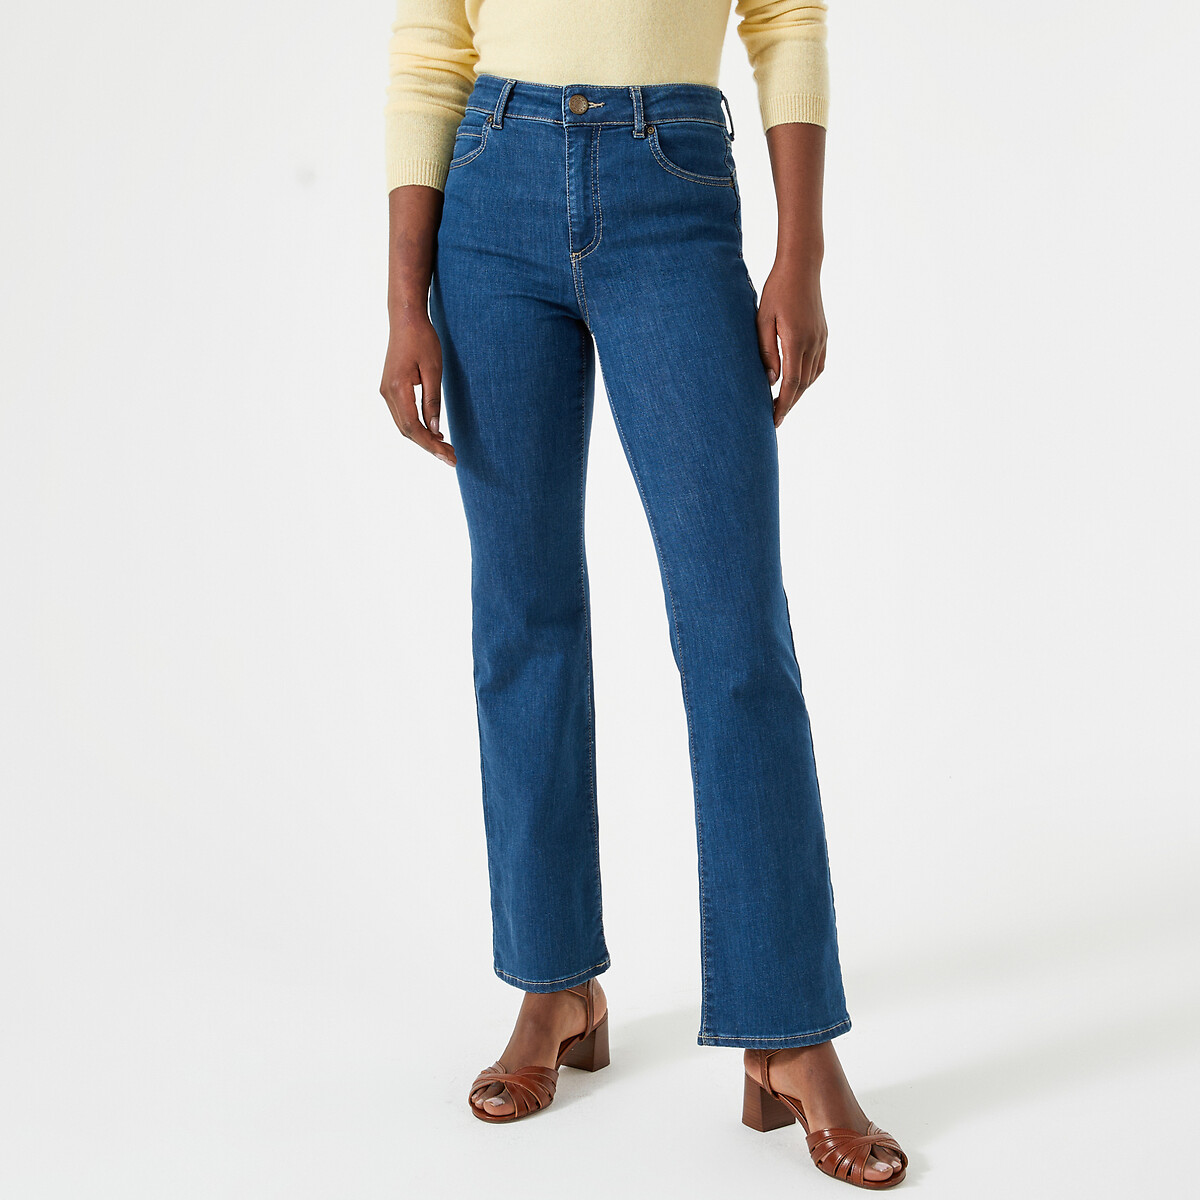 Image of Push-Up Bootcut Jeans, Length 30.5"